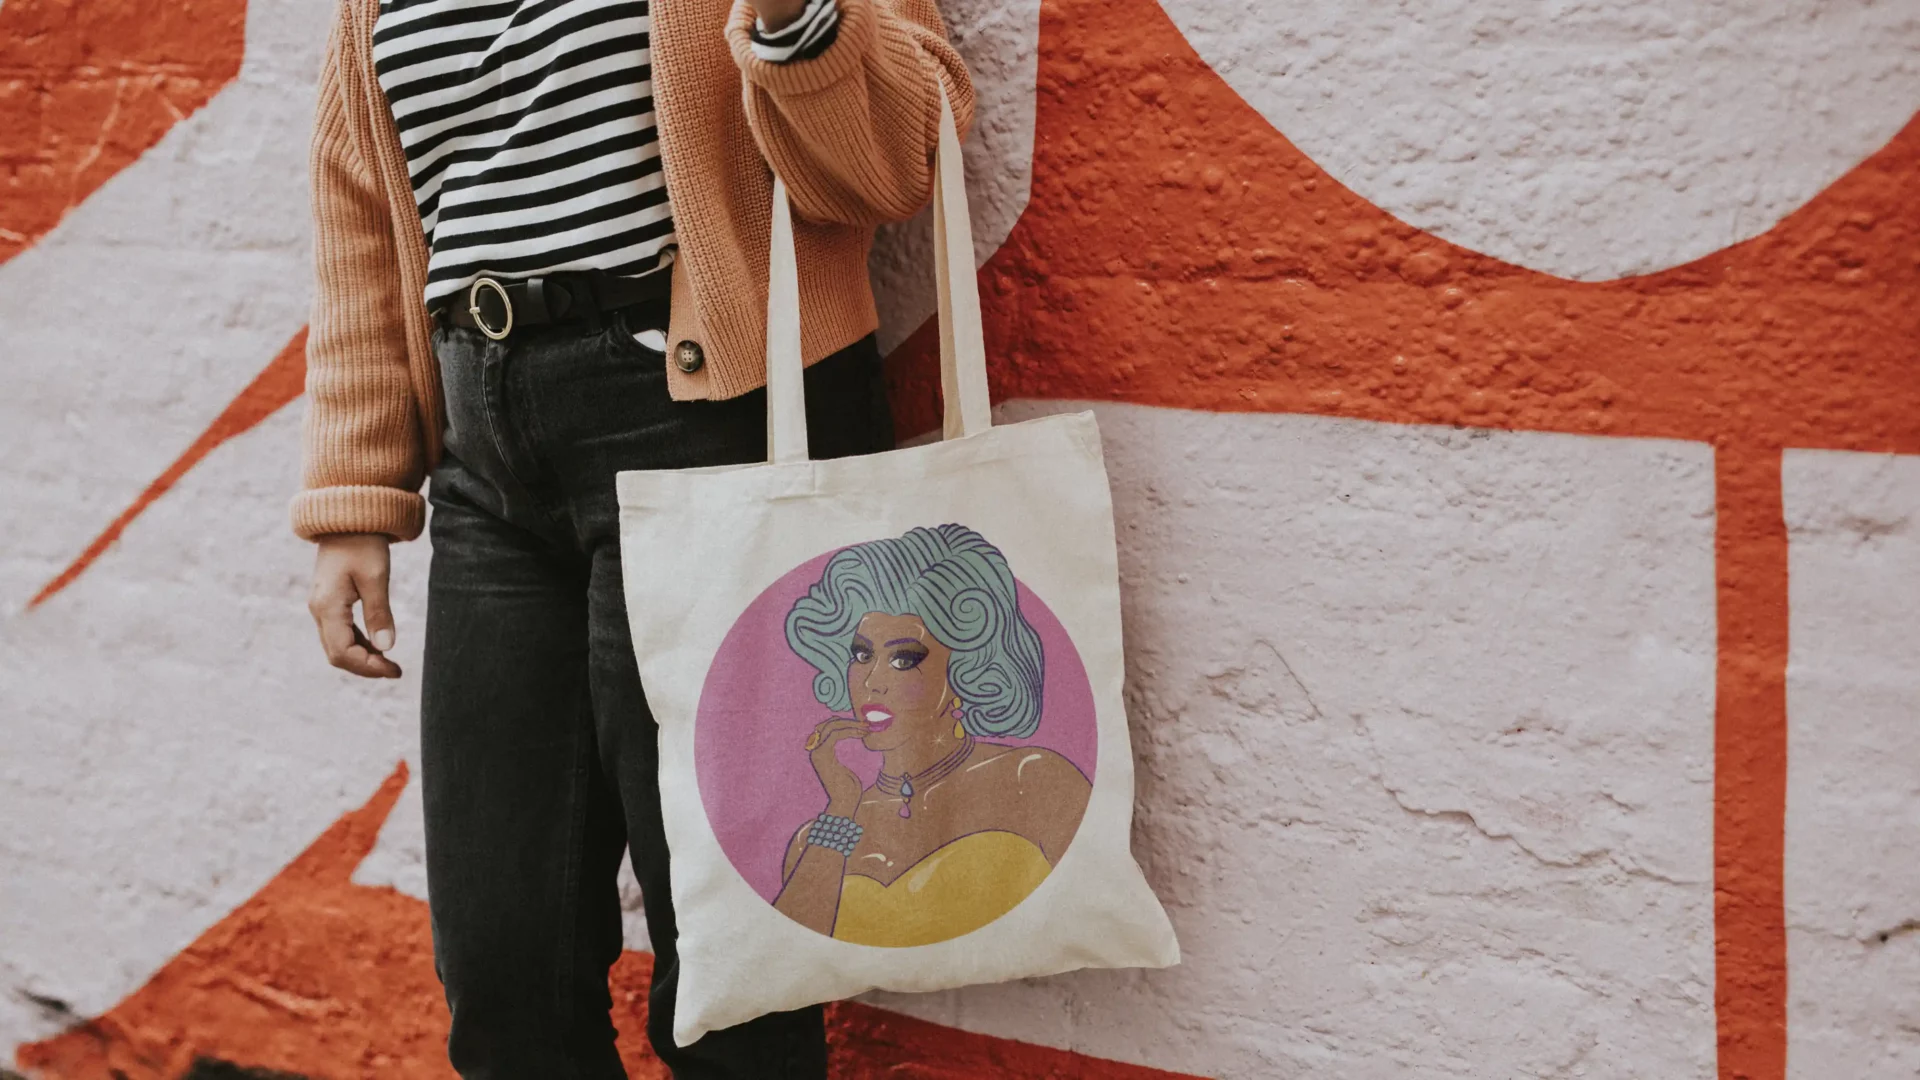 vibrant original festival branding featuring custom illustrations of performer in drag wearing fabulous oversized teal wig and yellow bustier, with fingers to lips. custom printed tote bag merchandise worn by stylish woman against a bold mural backdrop.